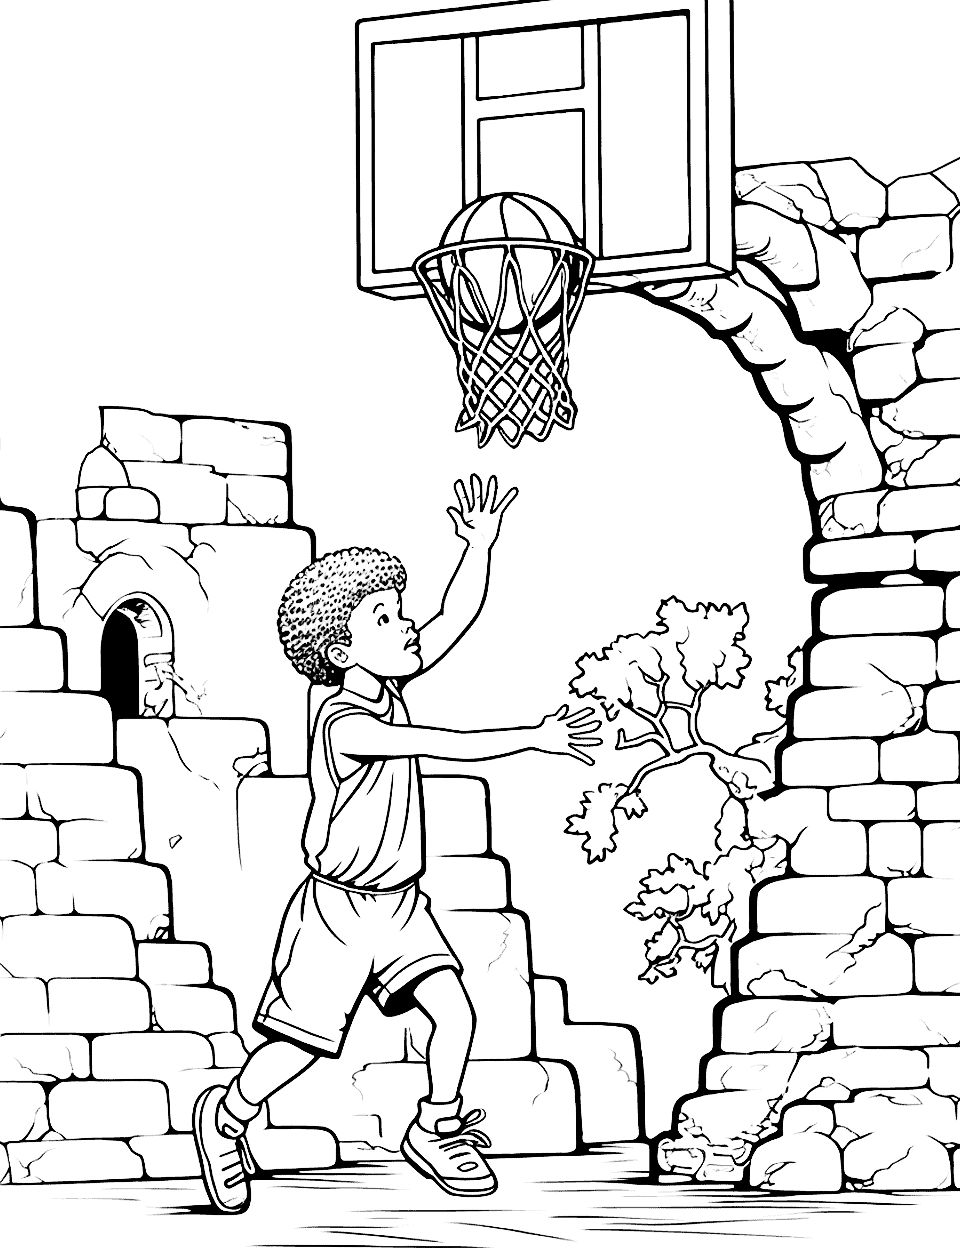 Ancient Ruins Basketball Coloring Page - A player discovering an old basketball hoop and playing in ancient ruins.